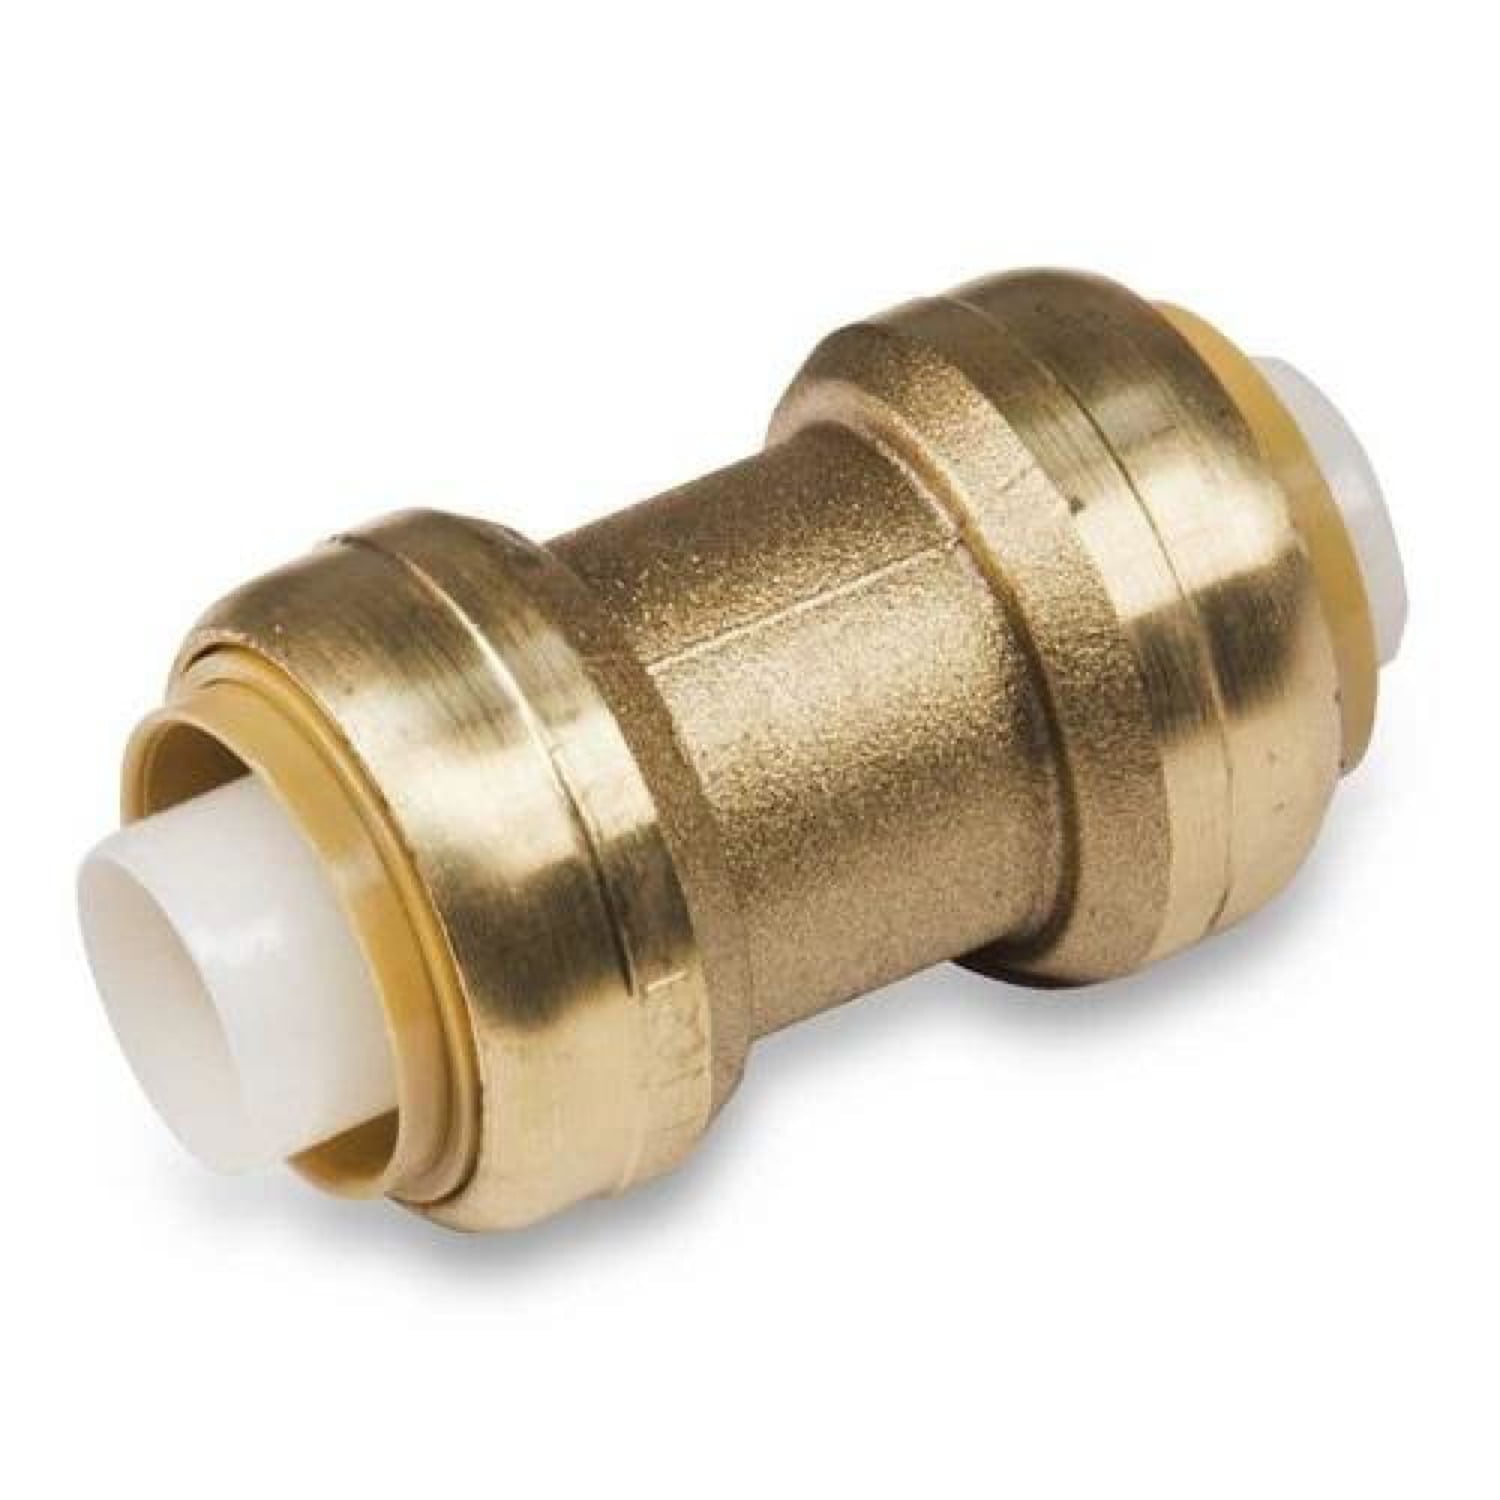 25 3/8" Sharkbite Style Push to Connect Lead-Free Brass Couplings Push-Fit 